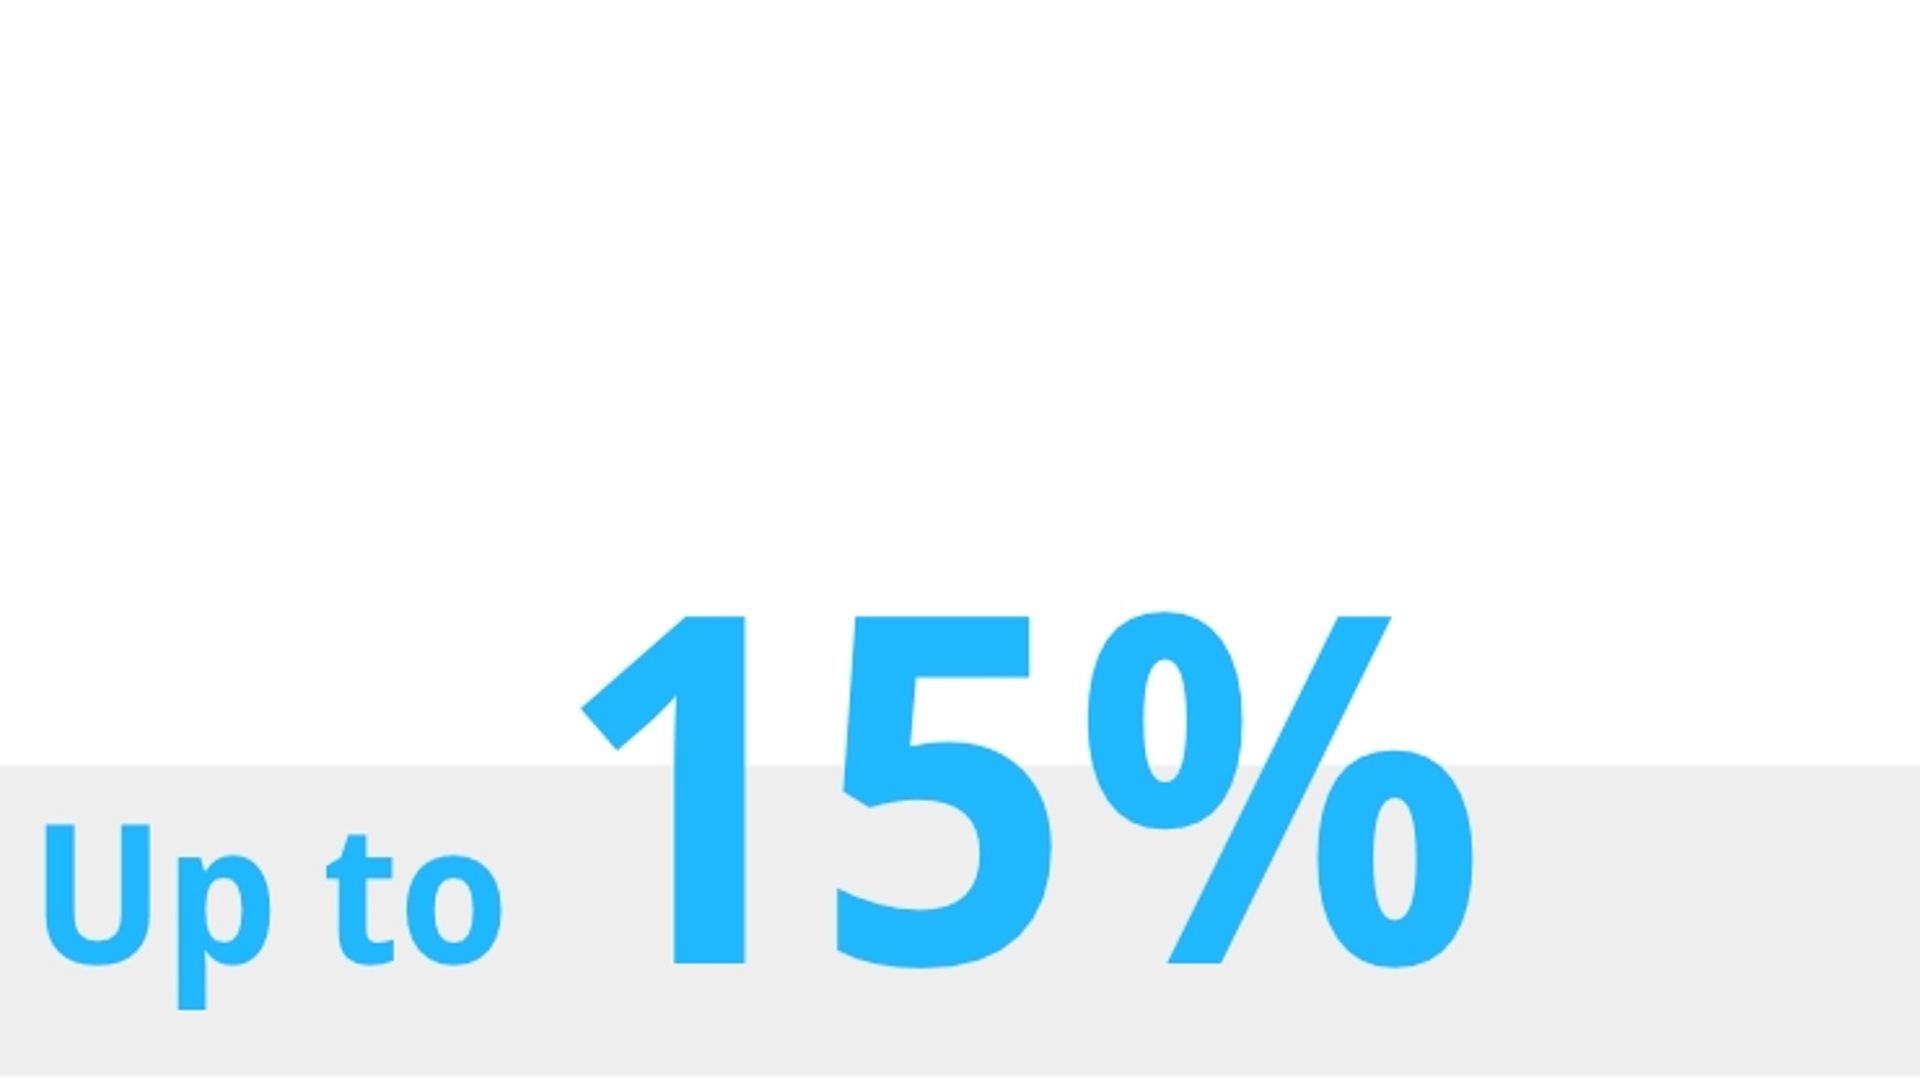 The picture shows the writing "Up to 15%".